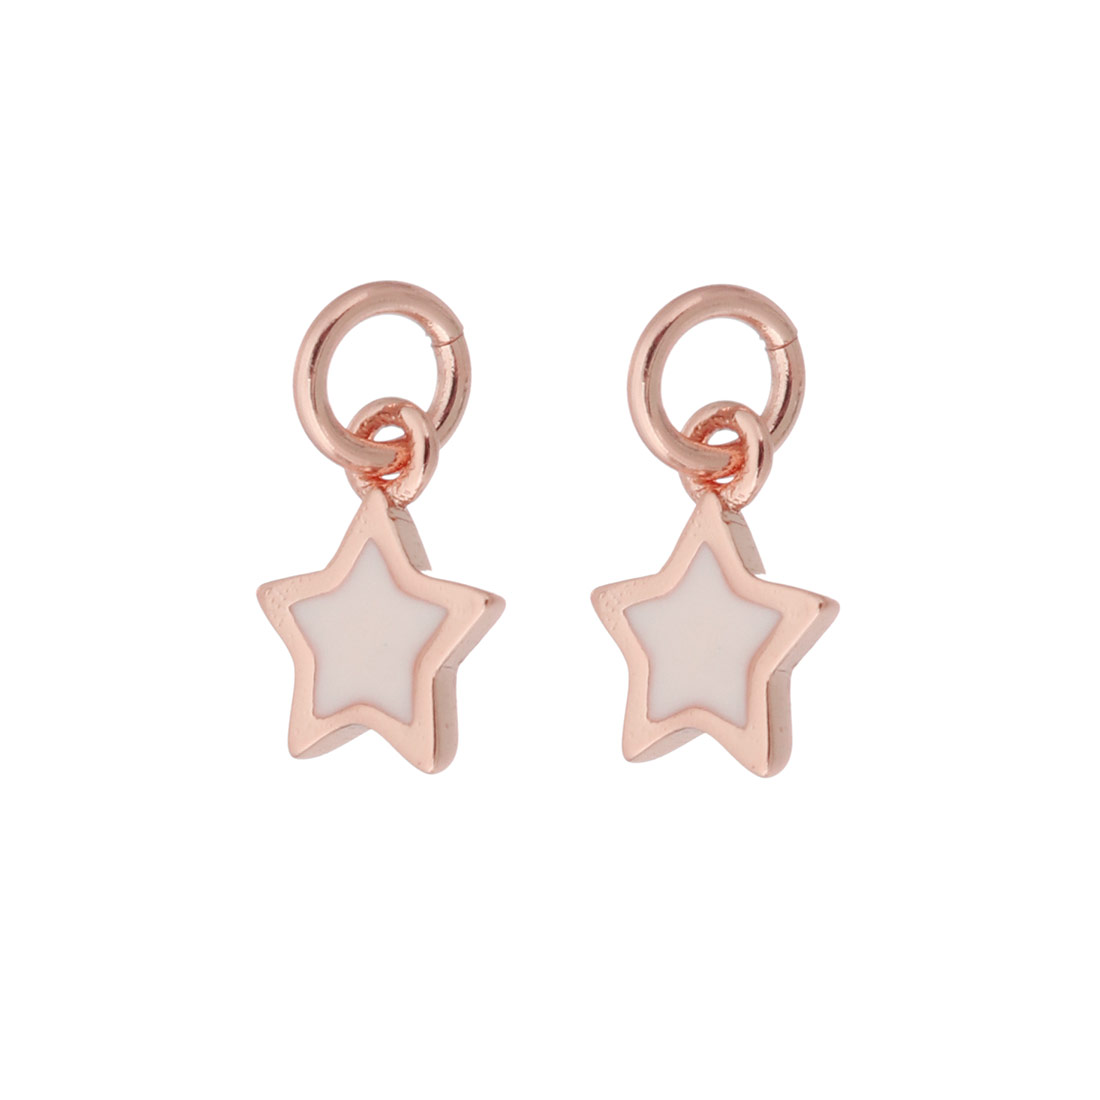 3:rose gold color plated with white enamel